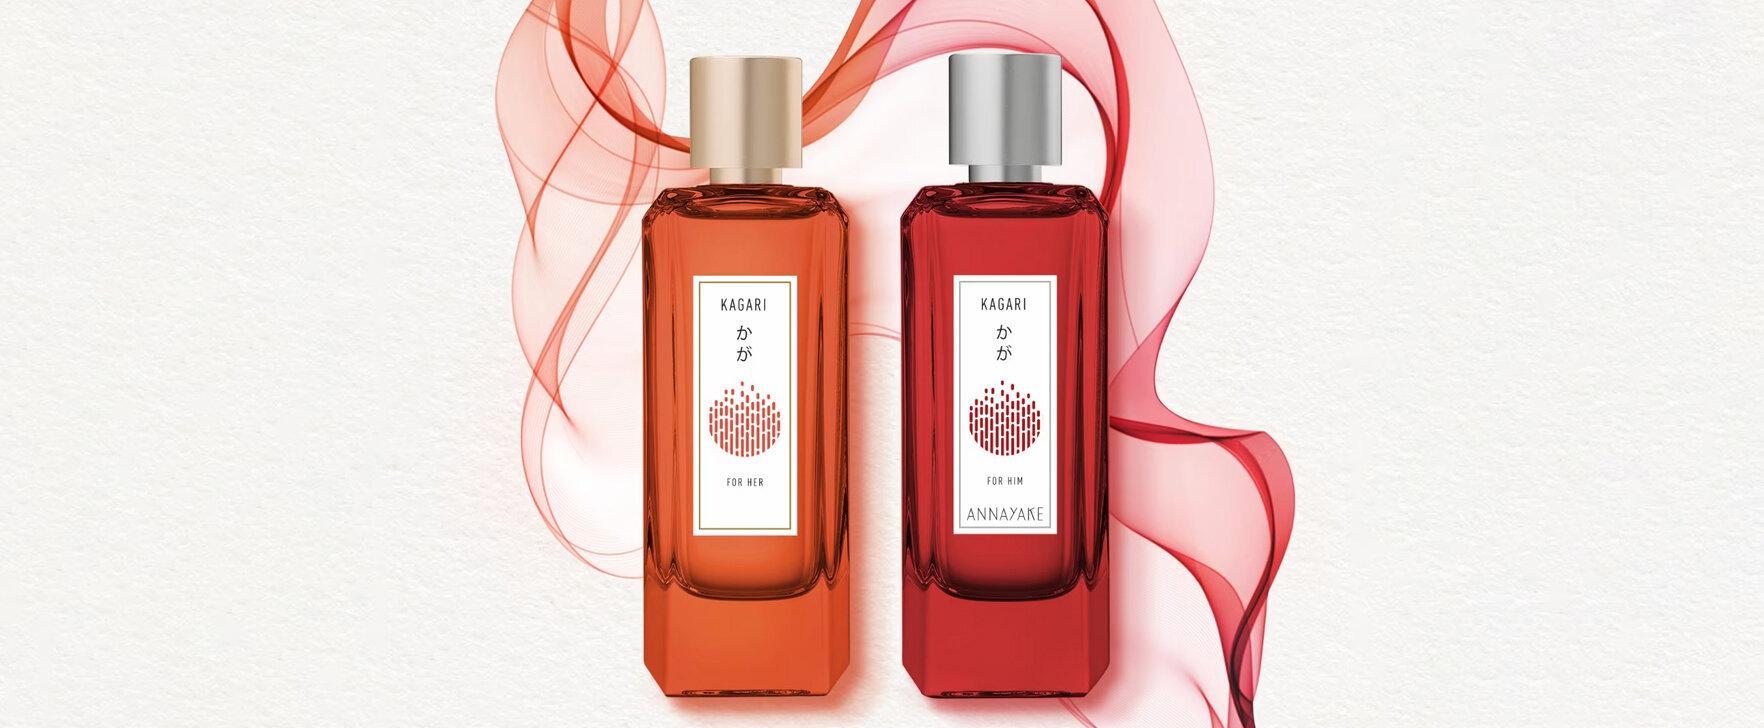 An Ode to Fire: The New Eau de Toilettes "Kagari for Her" and "Kagari for Him" by Annayake